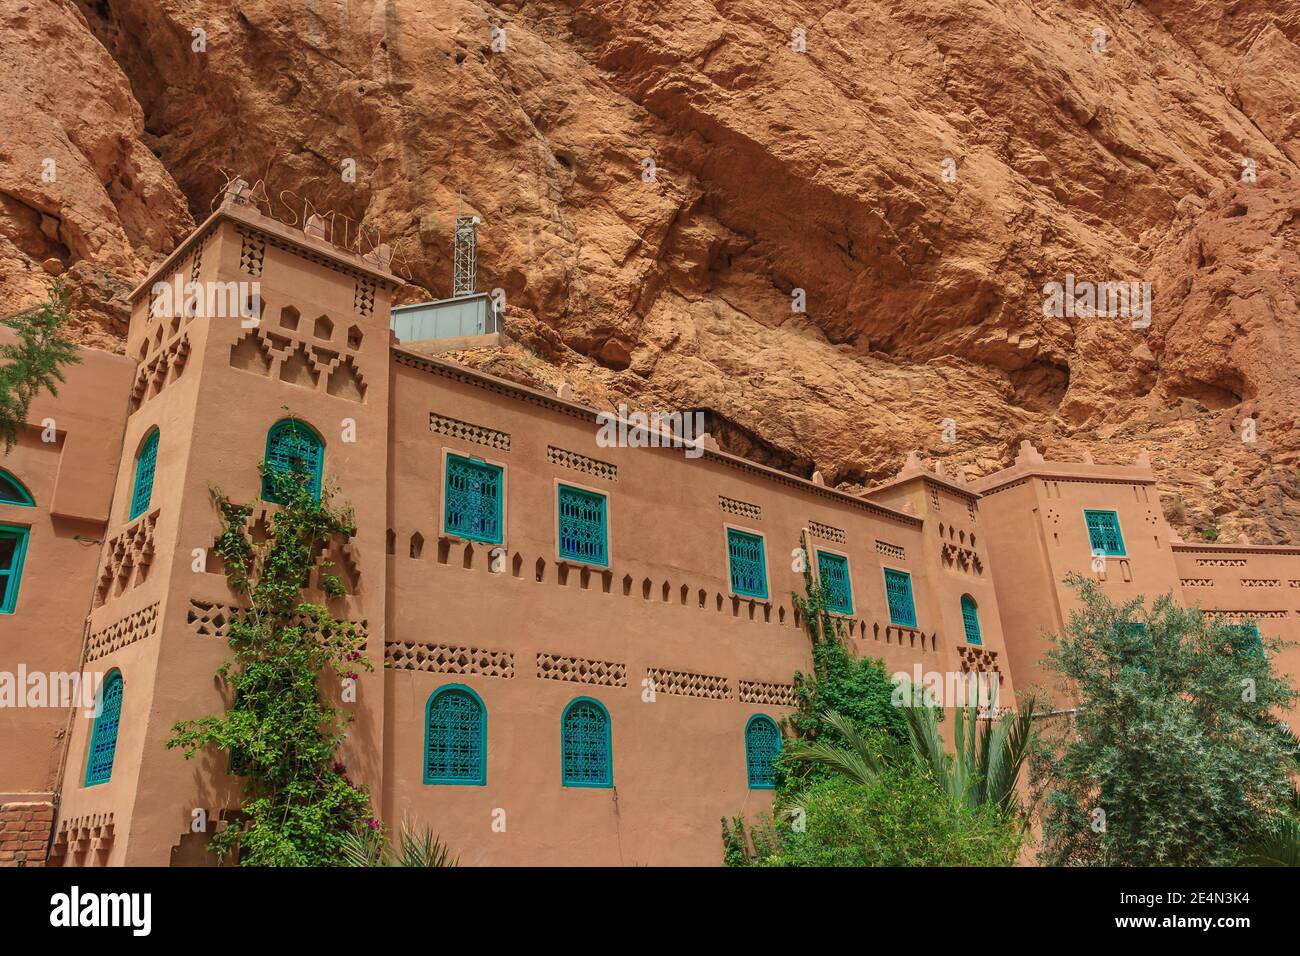 Hotel in the Gorge of Dades Stock Photo